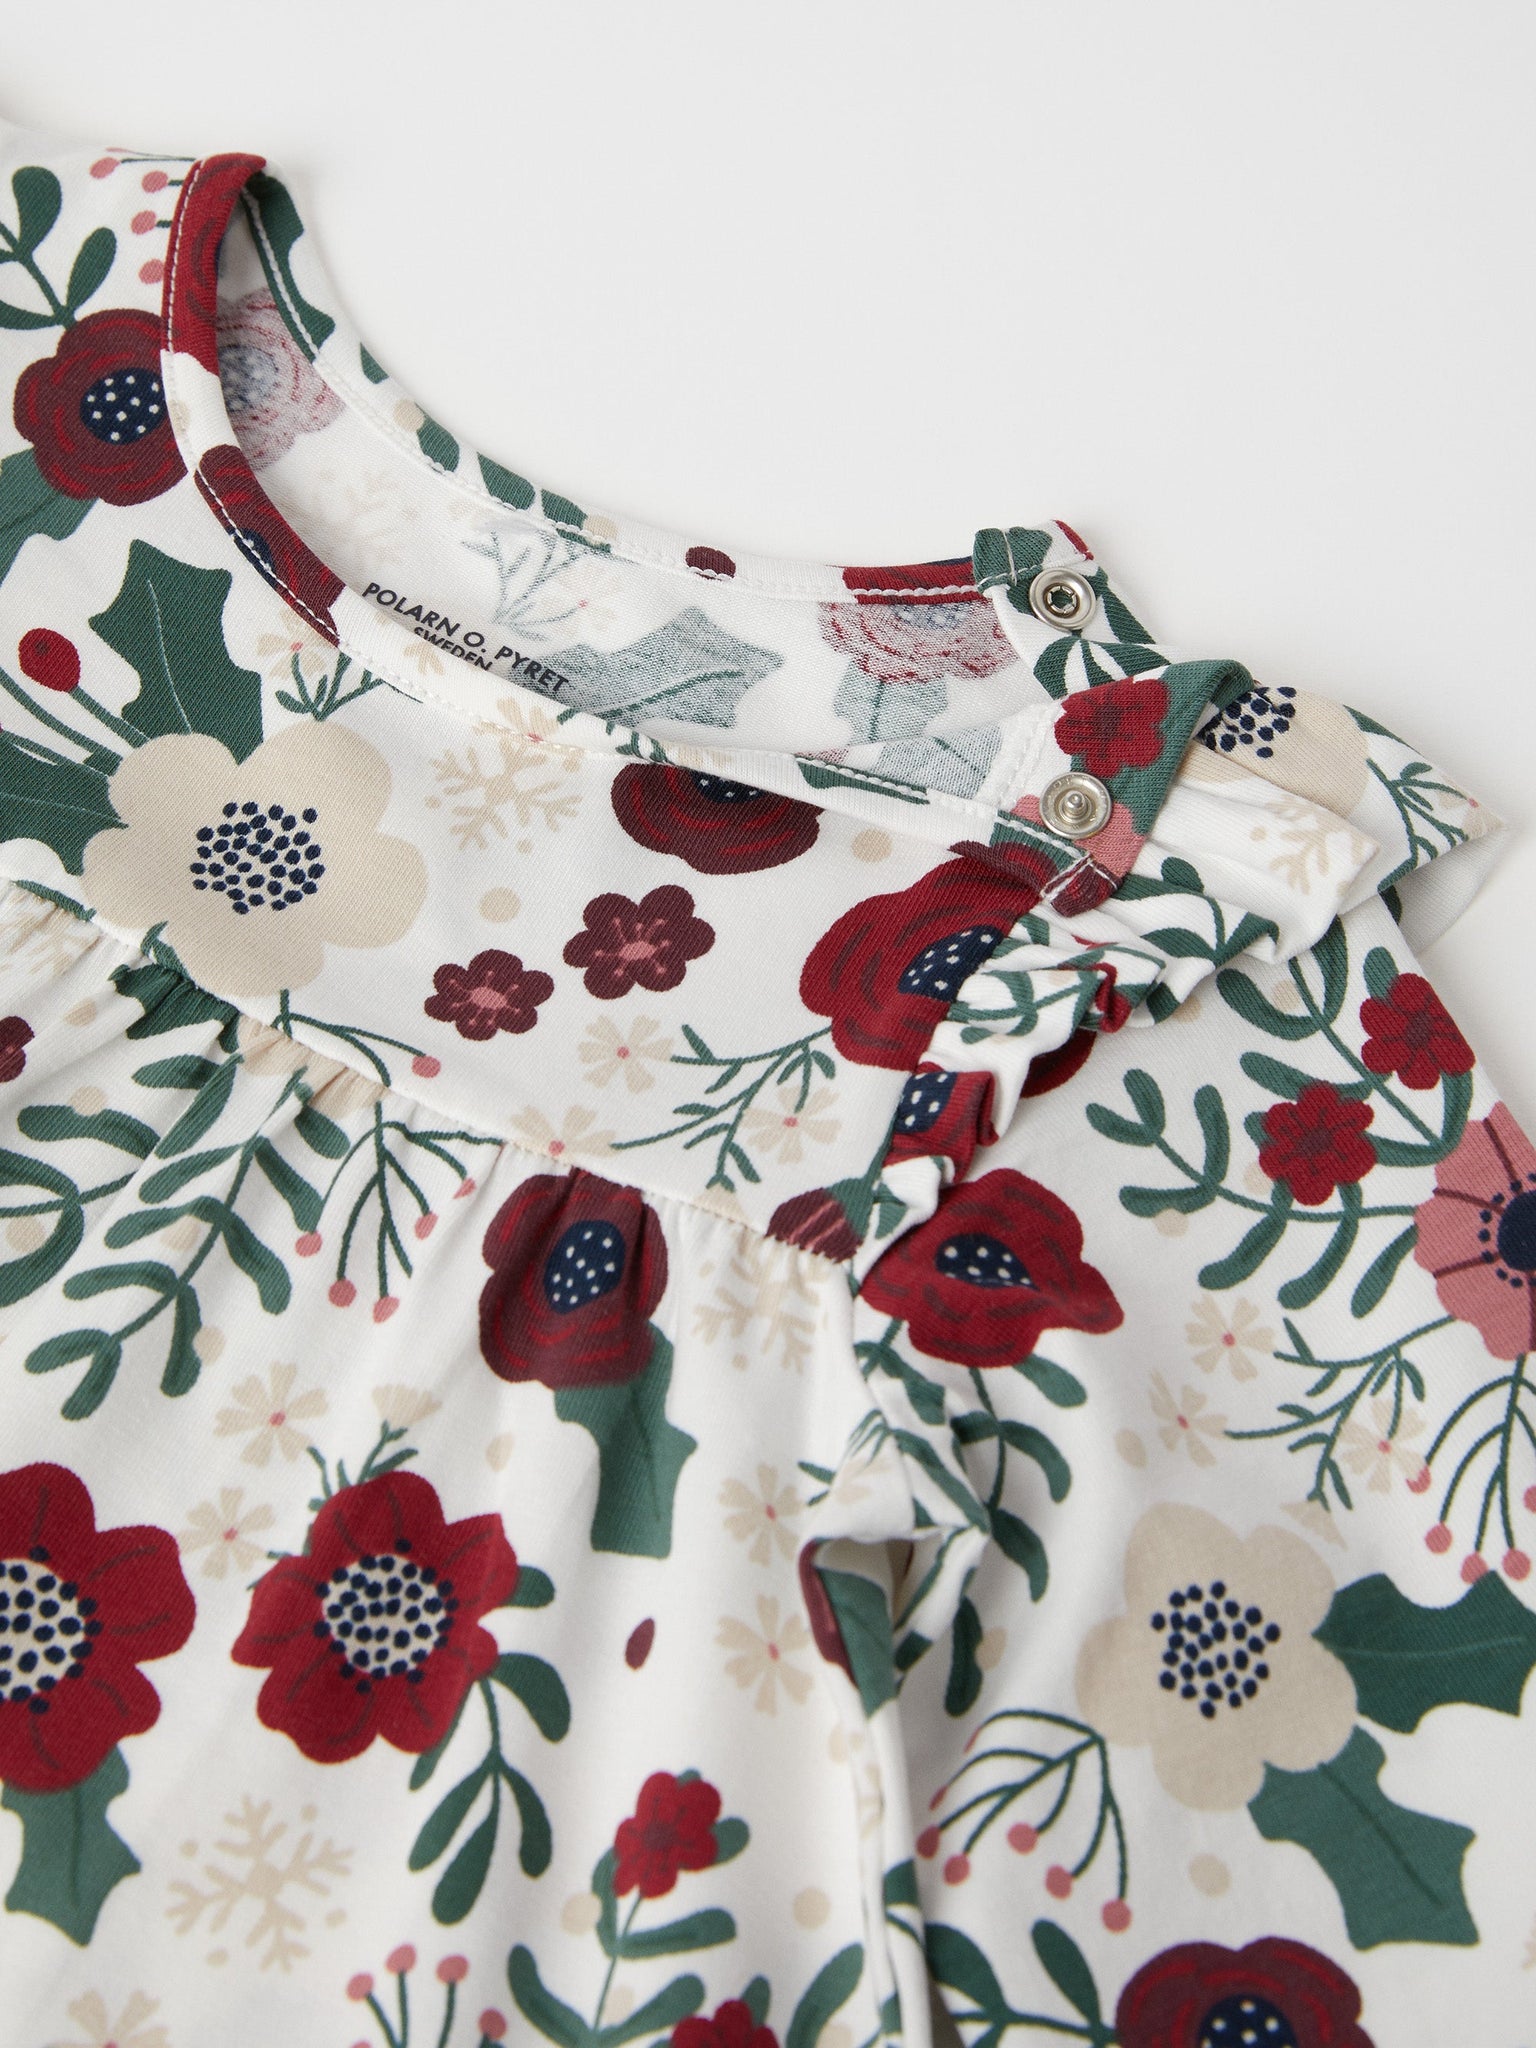 Floral Organic Cotton Baby Dress from the Polarn O. Pyret baby collection. The best ethical baby clothes